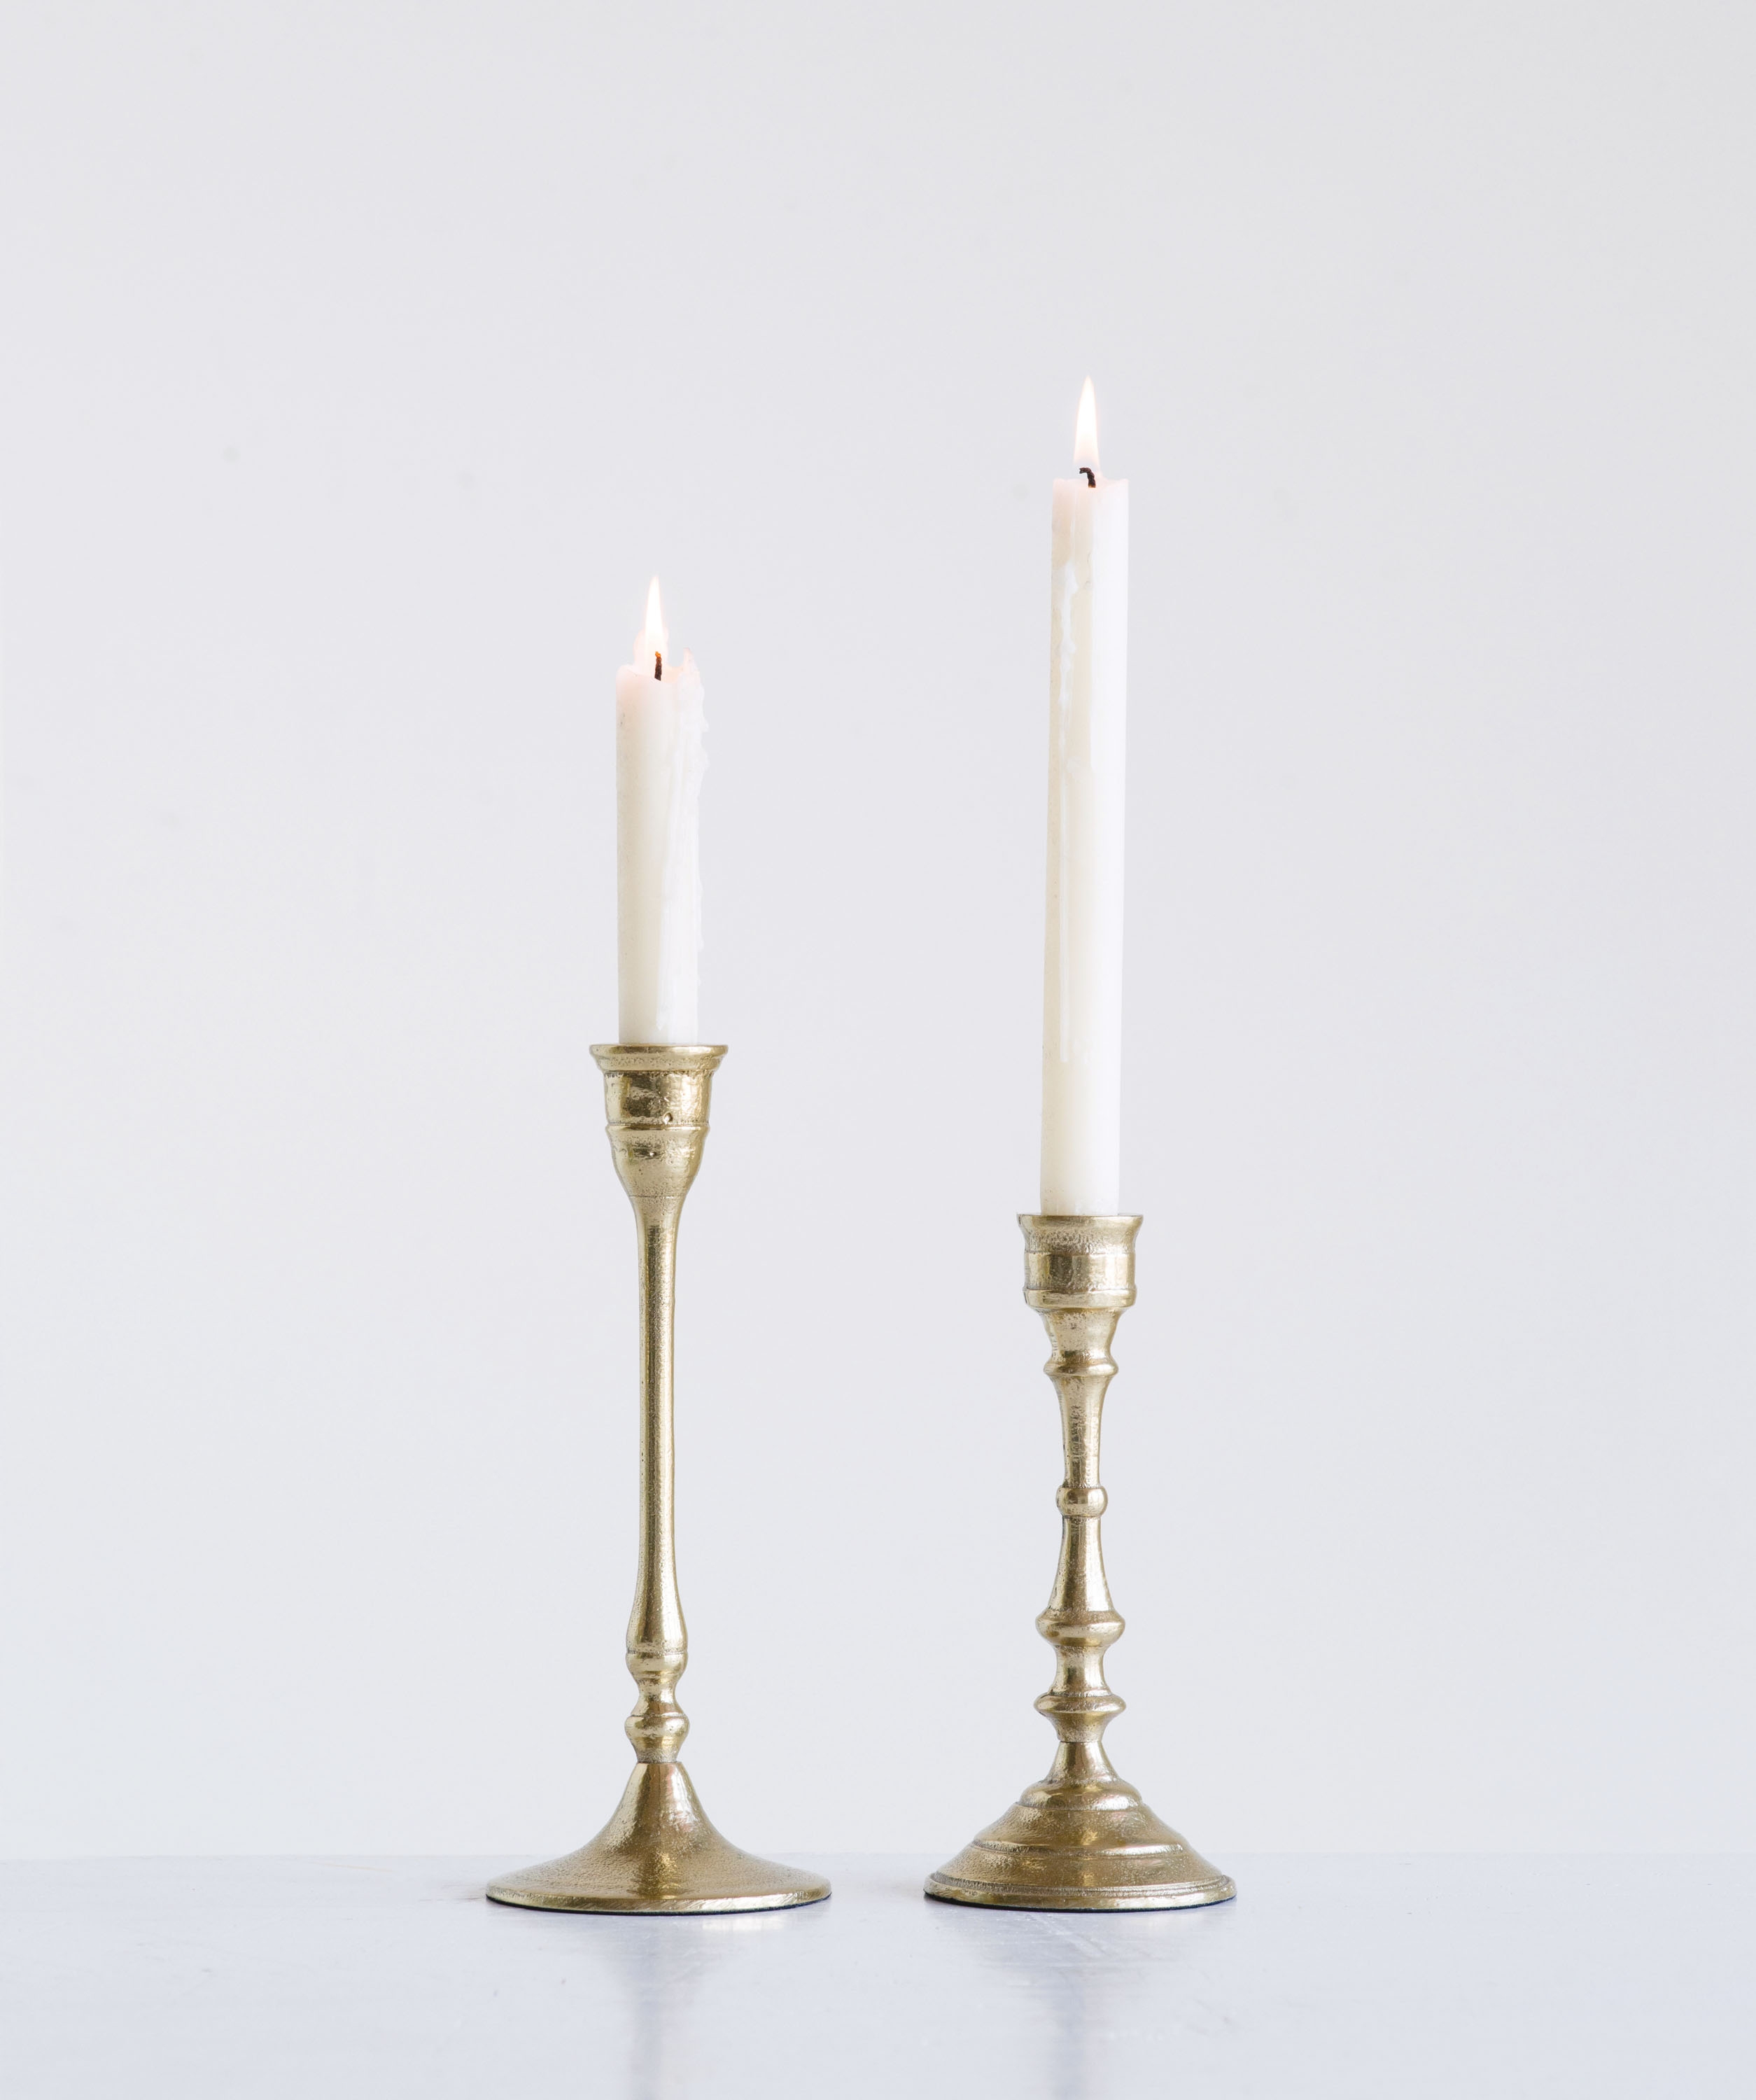 Decorative Taper Candle Holders, Gold, Set of 2 - Image 1